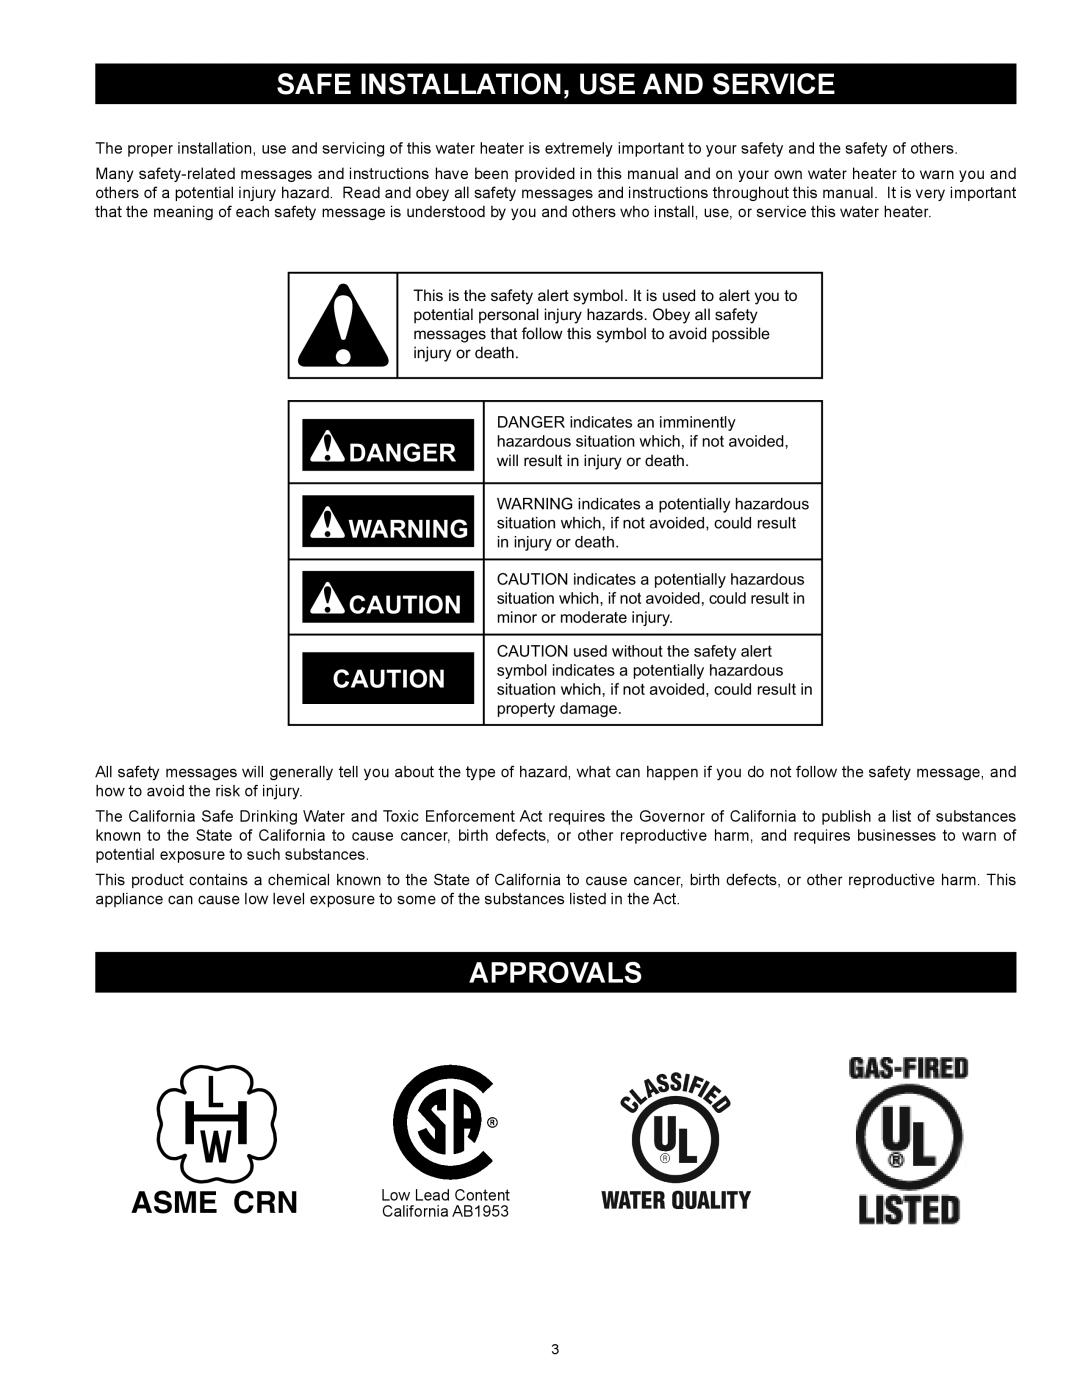 State Industries SBD85500PE, SBD85500NE instruction manual Safe Installation, Use and Service, Approvals, Asme Crn, Danger 